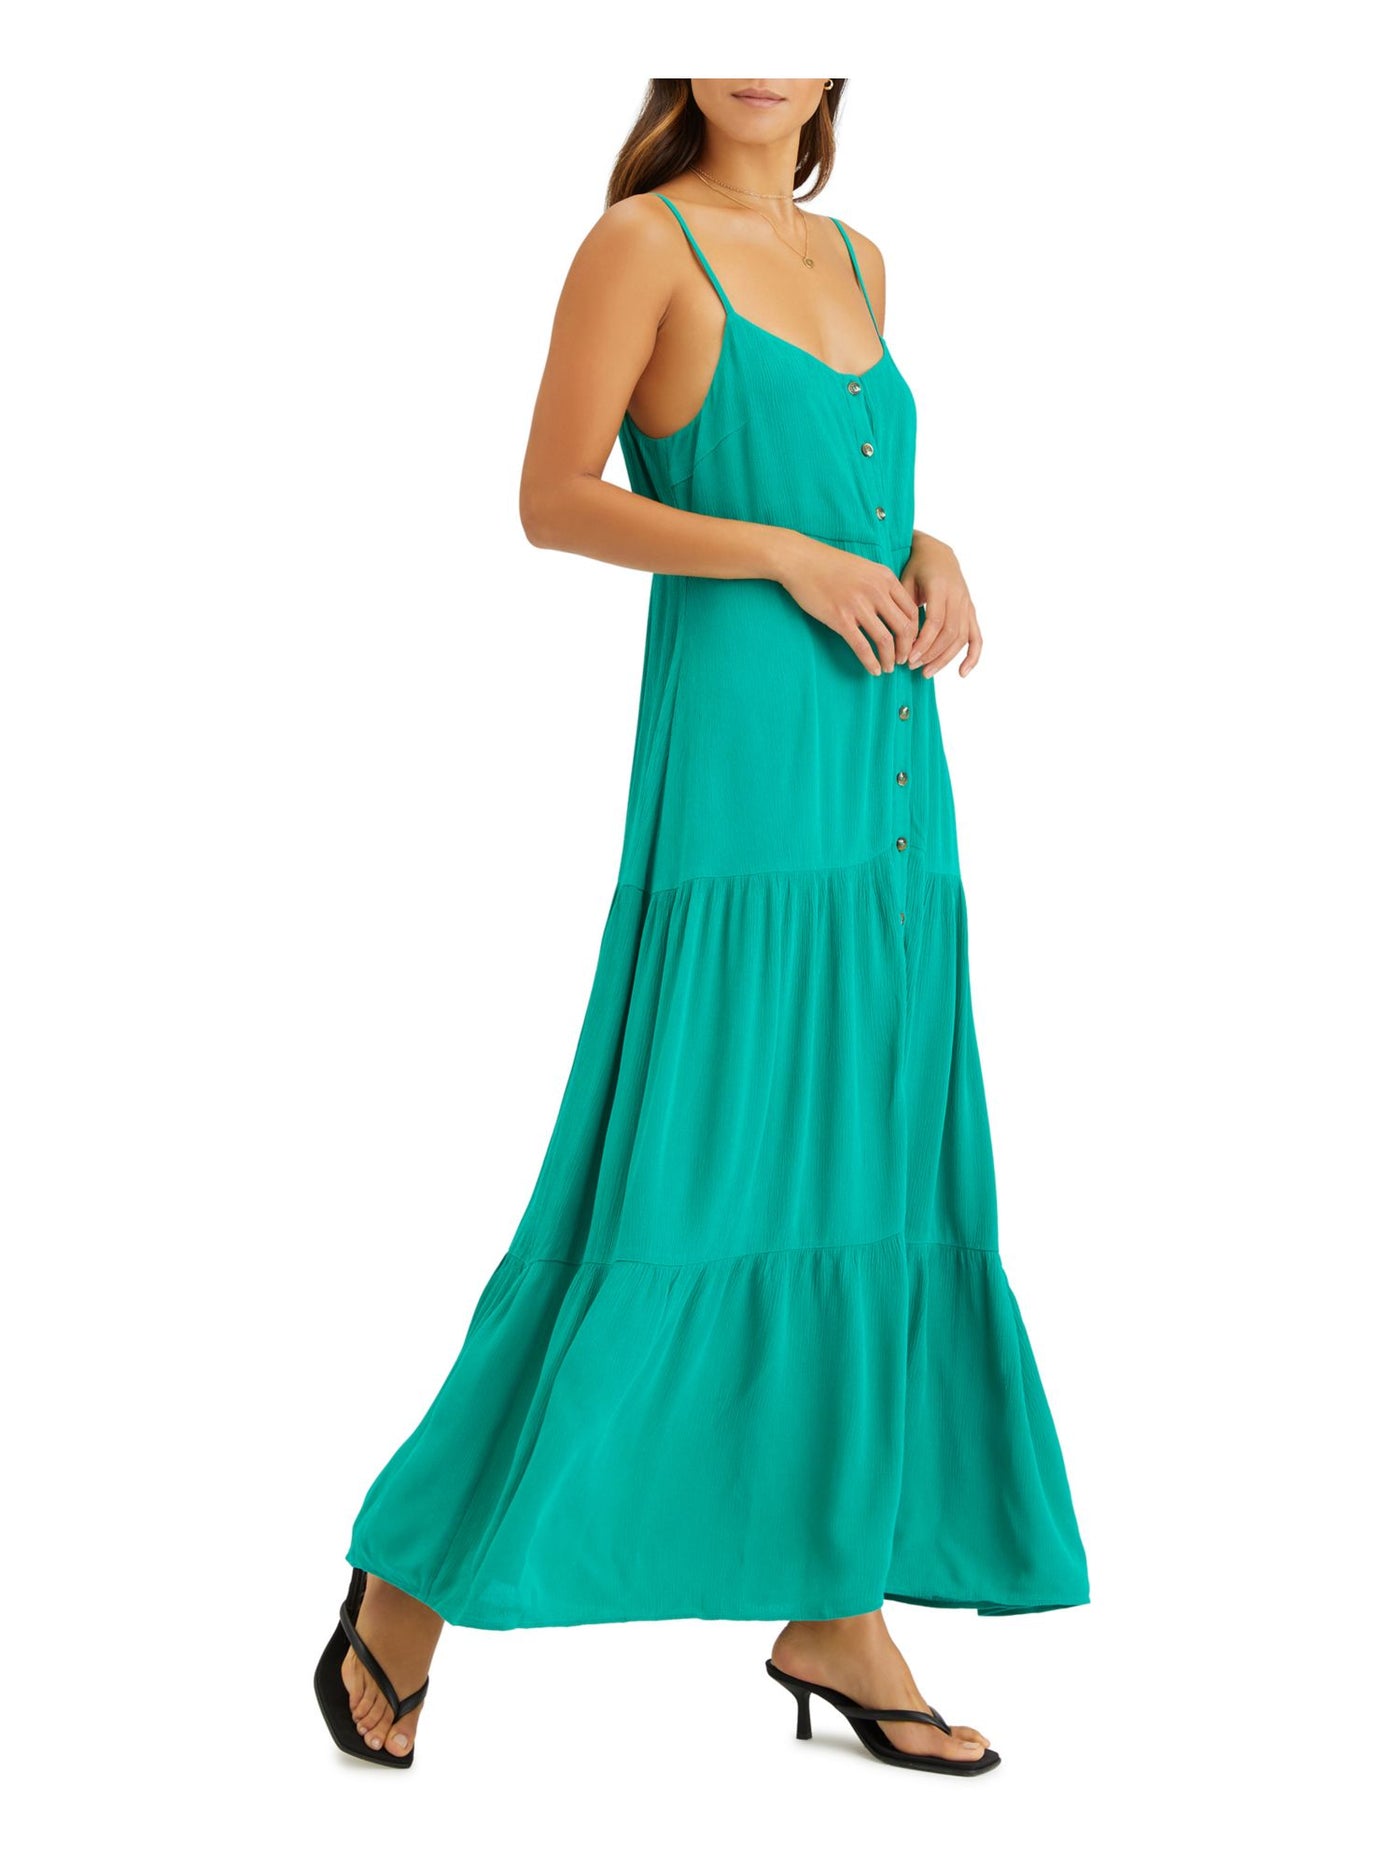 SANCTUARY Womens Teal Pleated Tiered Adjustable Straps Button Spaghetti Strap Scoop Neck Maxi Shift Dress S